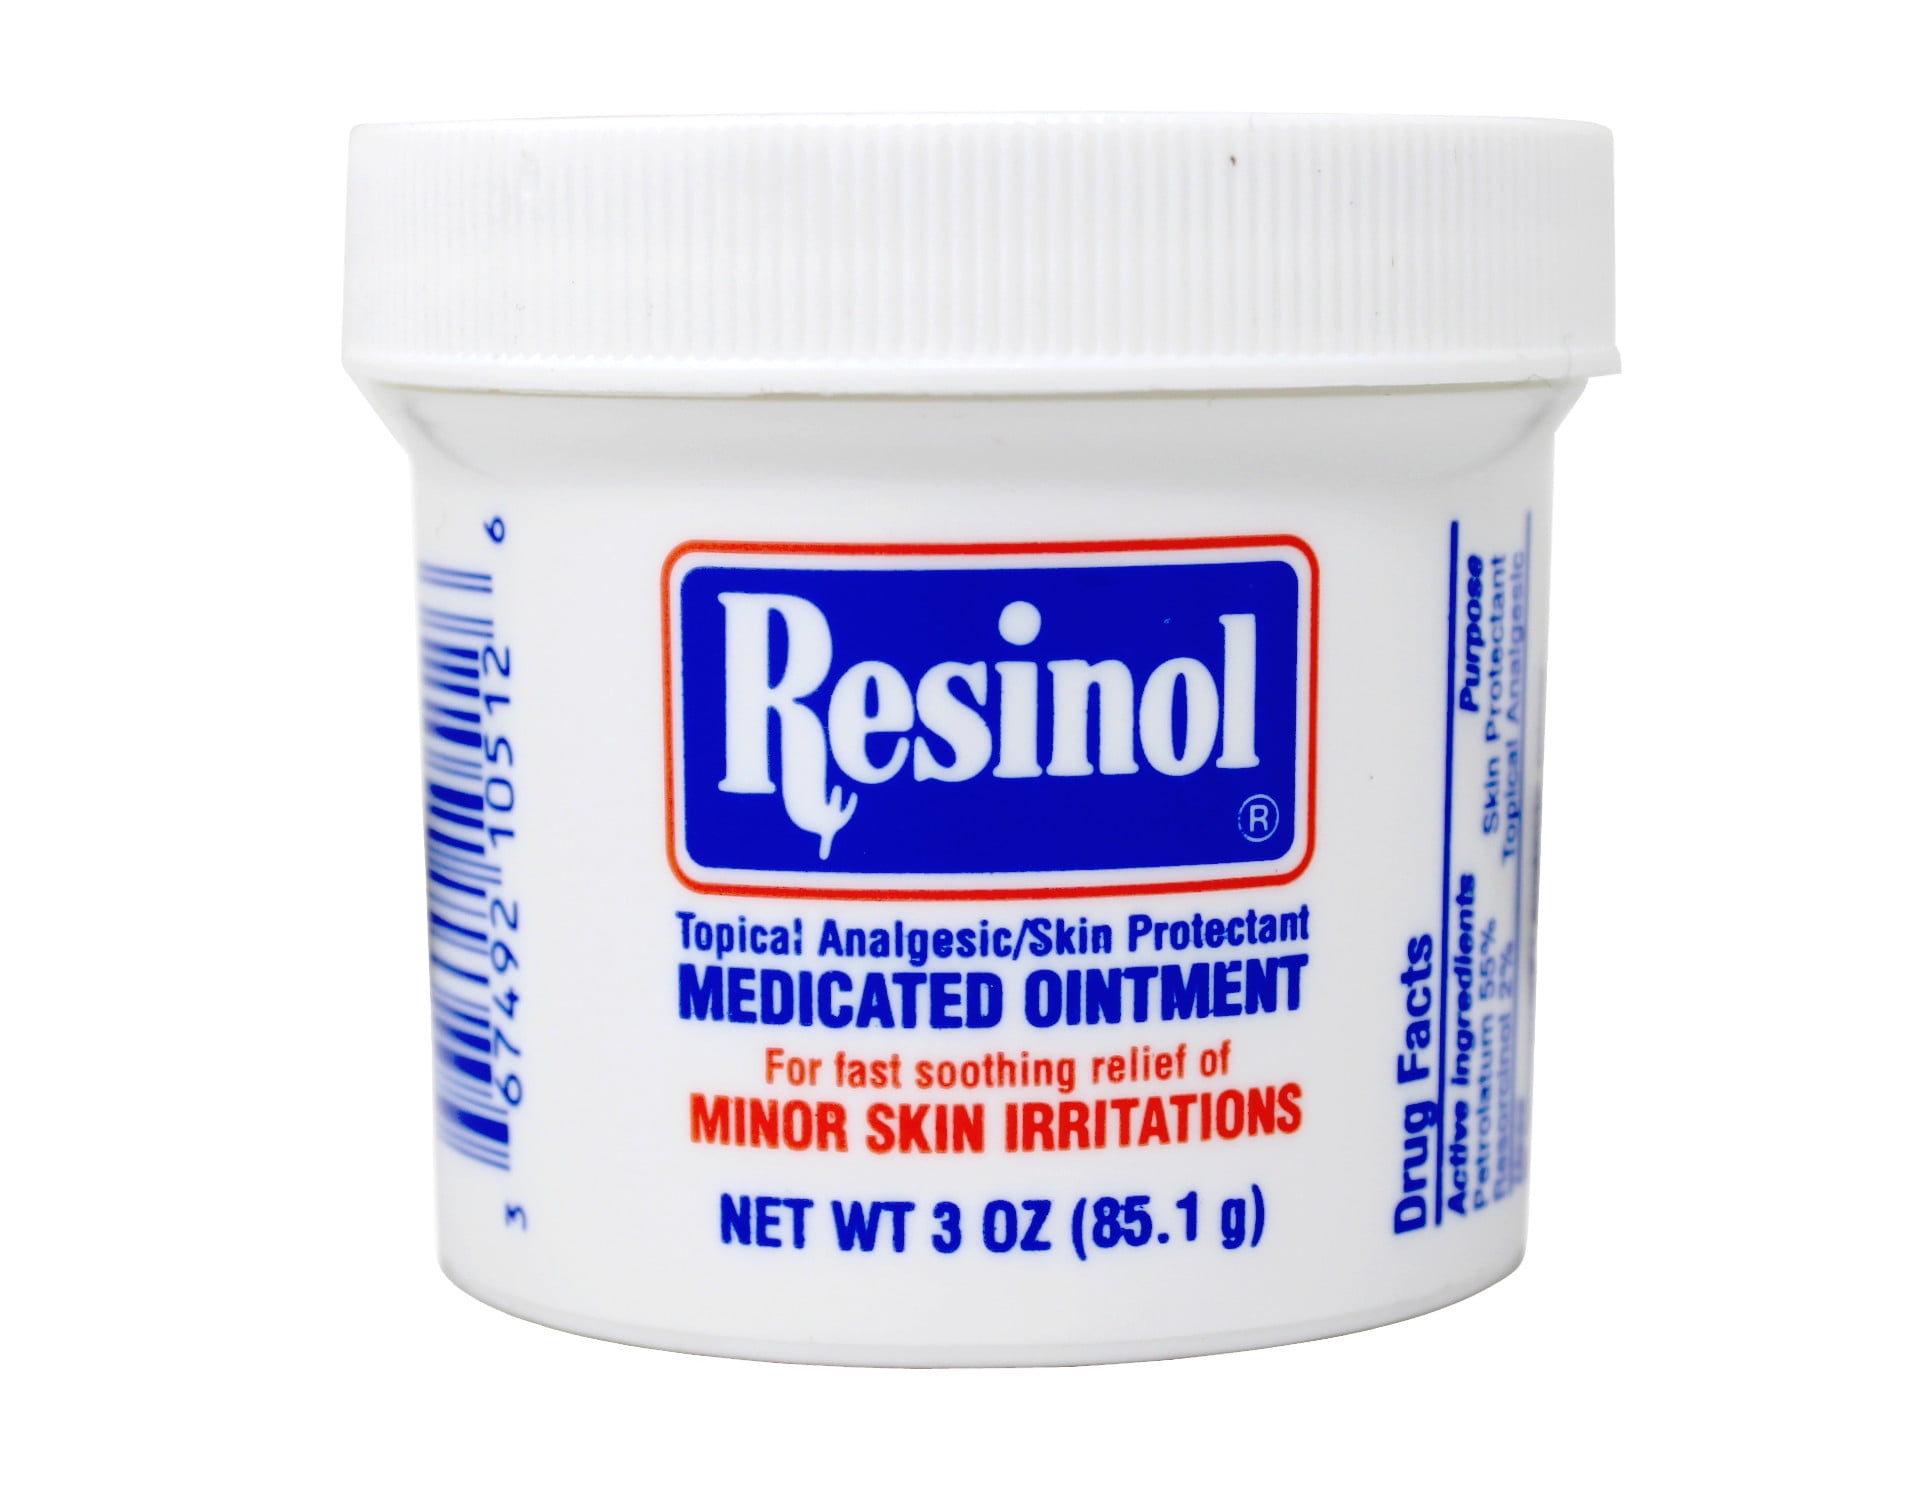 Resinol Medicated Ointment For Itch Relief And Protection Of Skin Rashes  and Irritations, 3 Ounce Jar